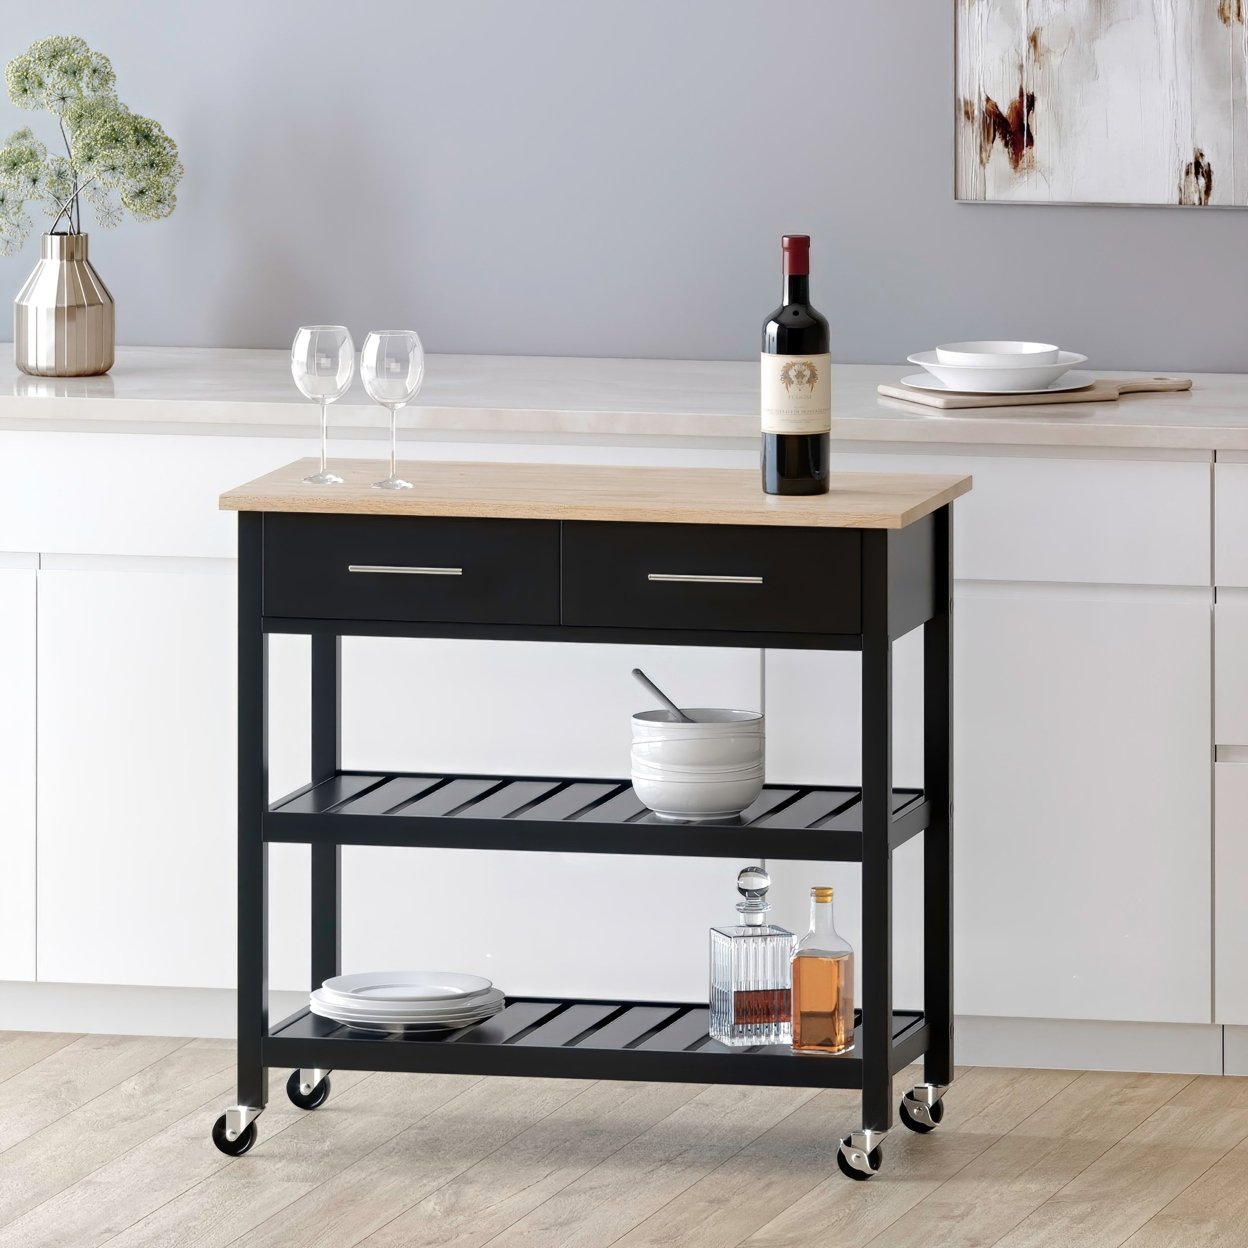 Enon Contemporary Kitchen Cart With Wheels - Black/natural